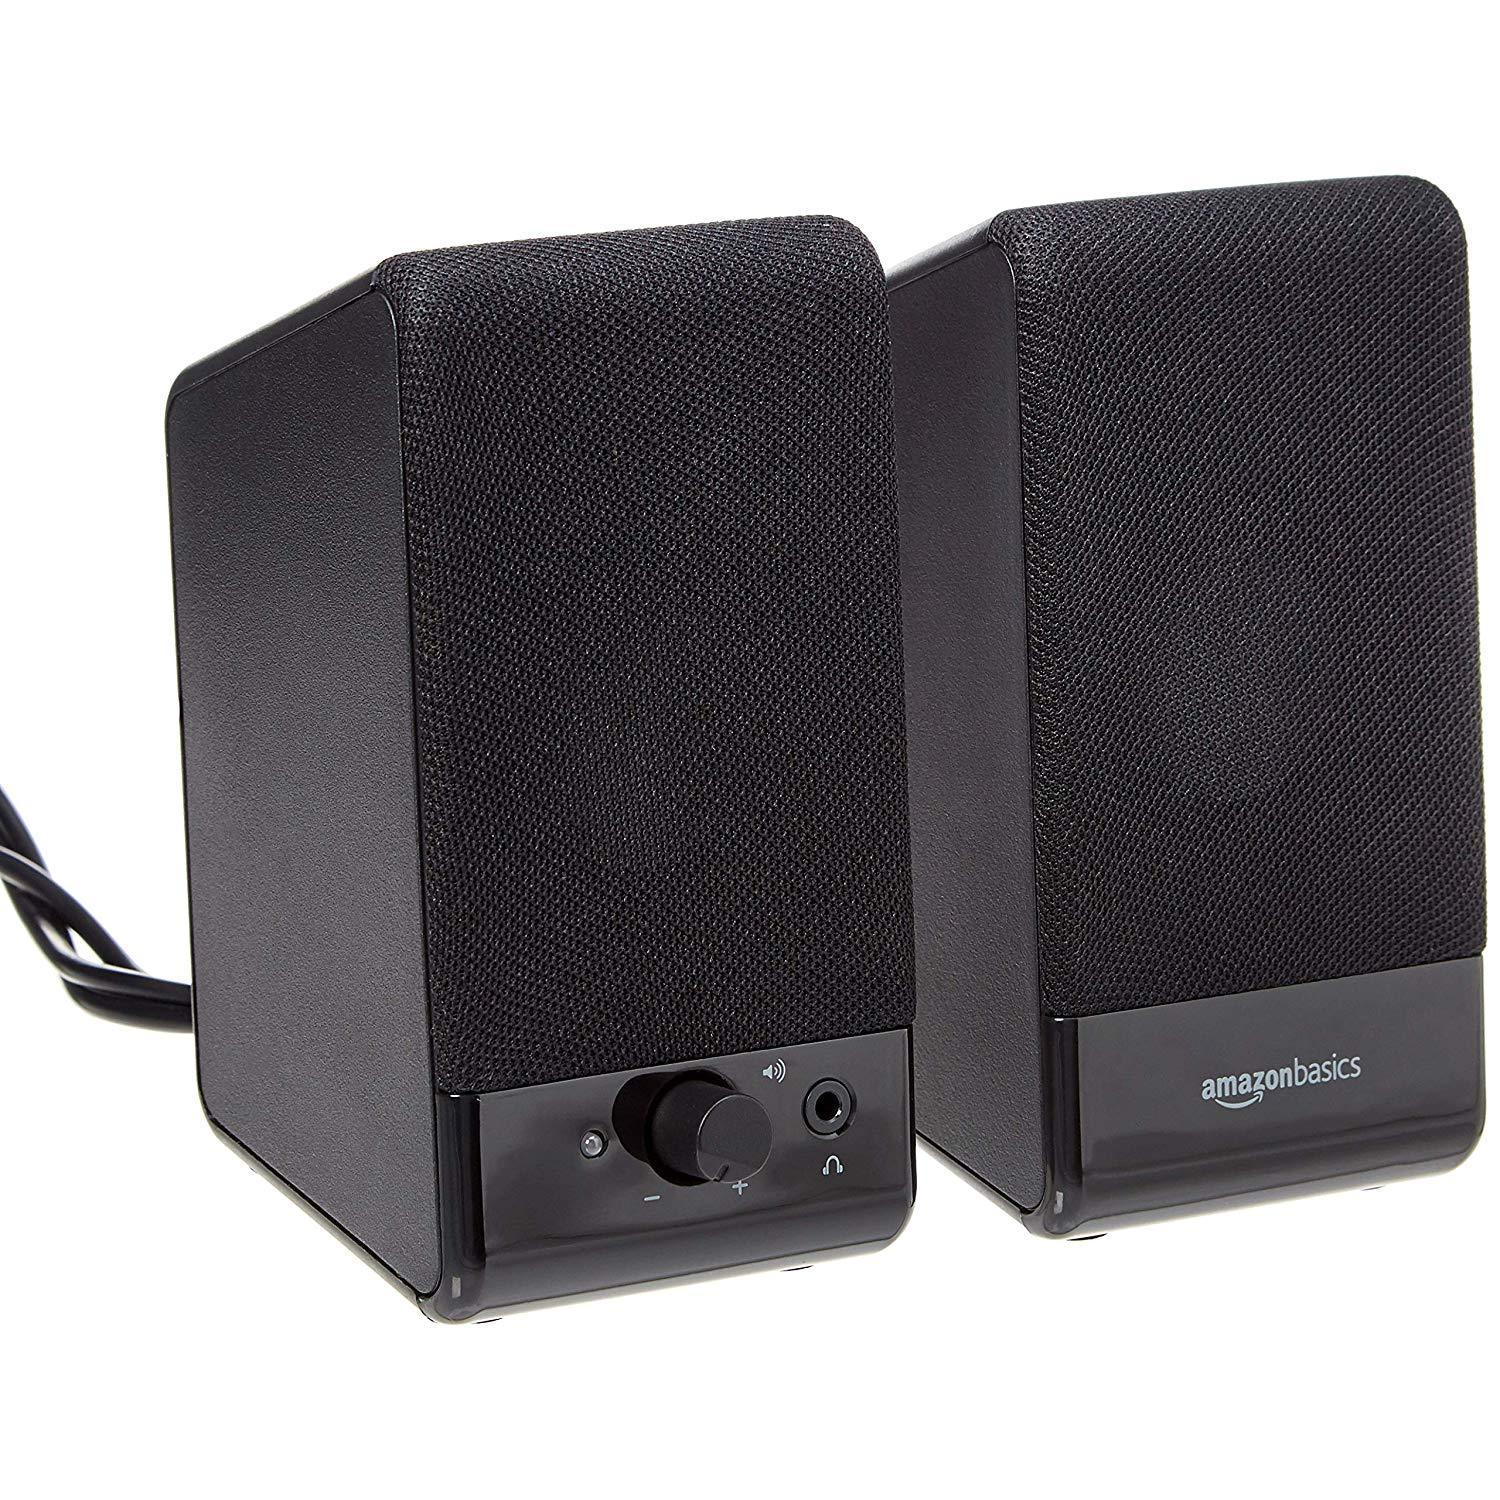 AmazonBasics Computer Speakers, USB Powered review These budget